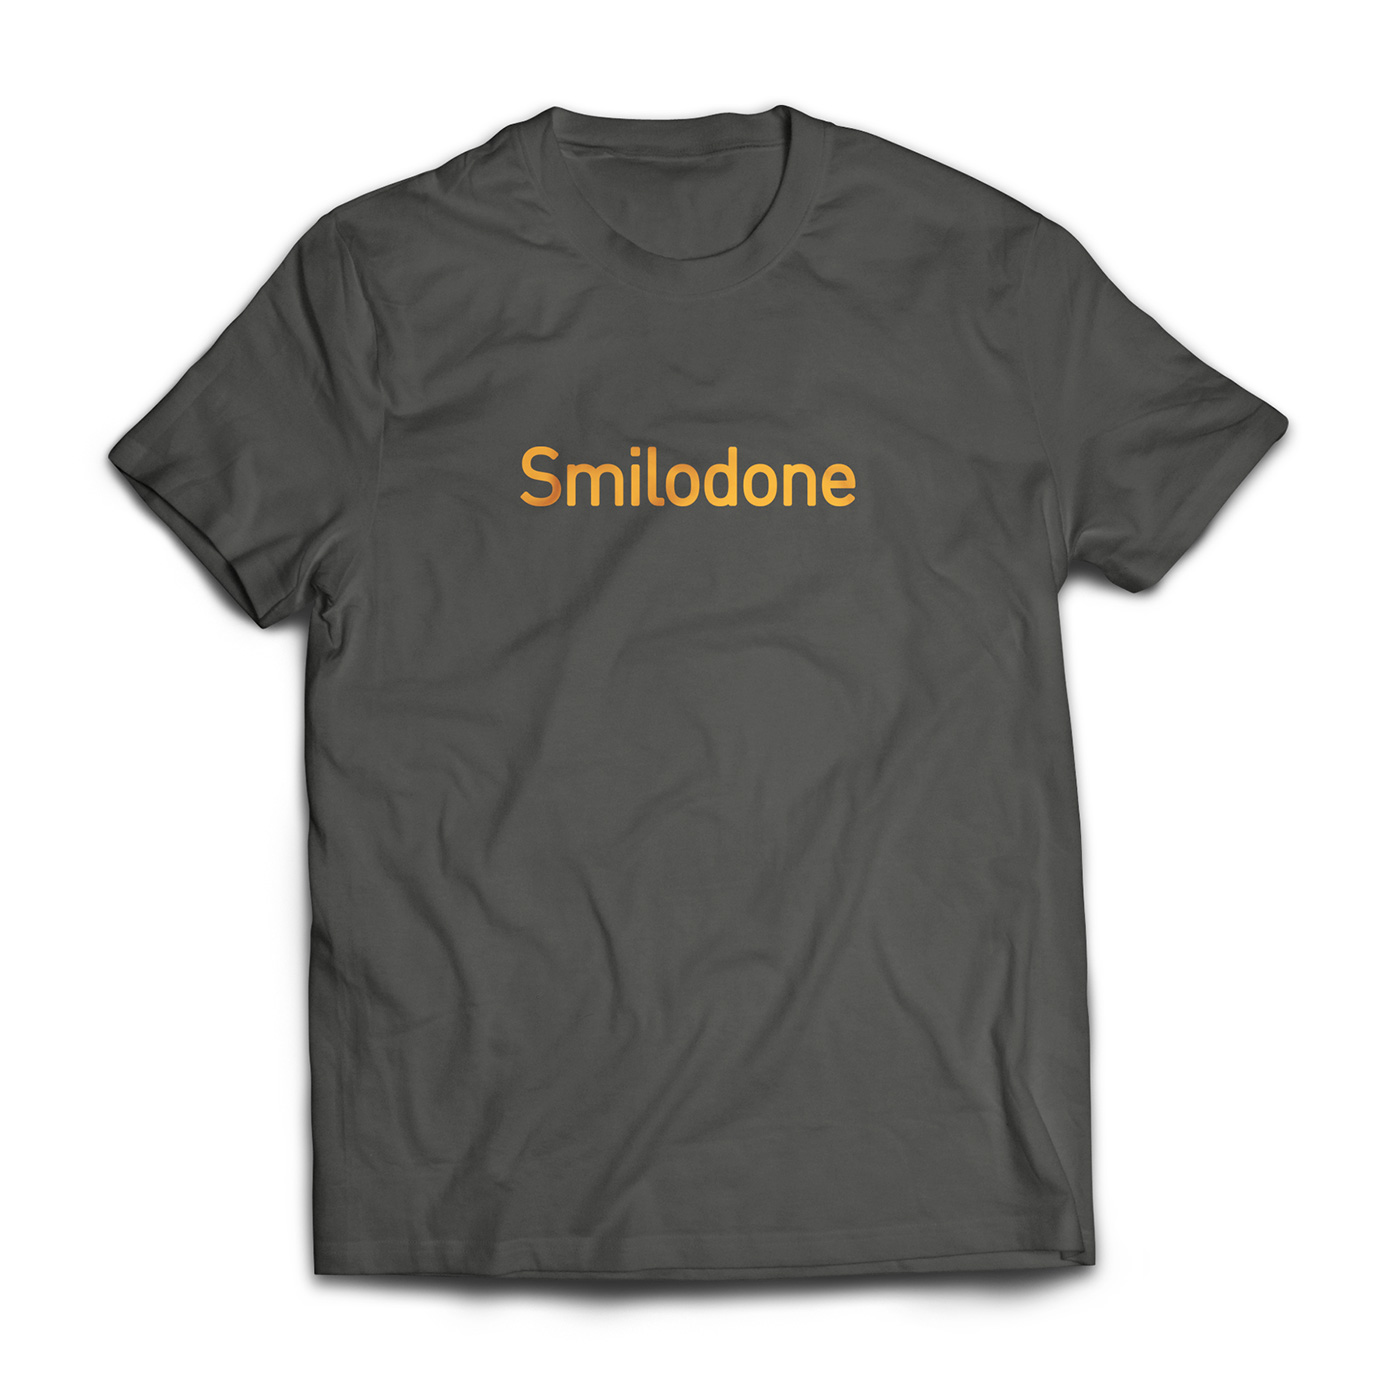 Smilodone t-shirt #3 with a Smilodone writing